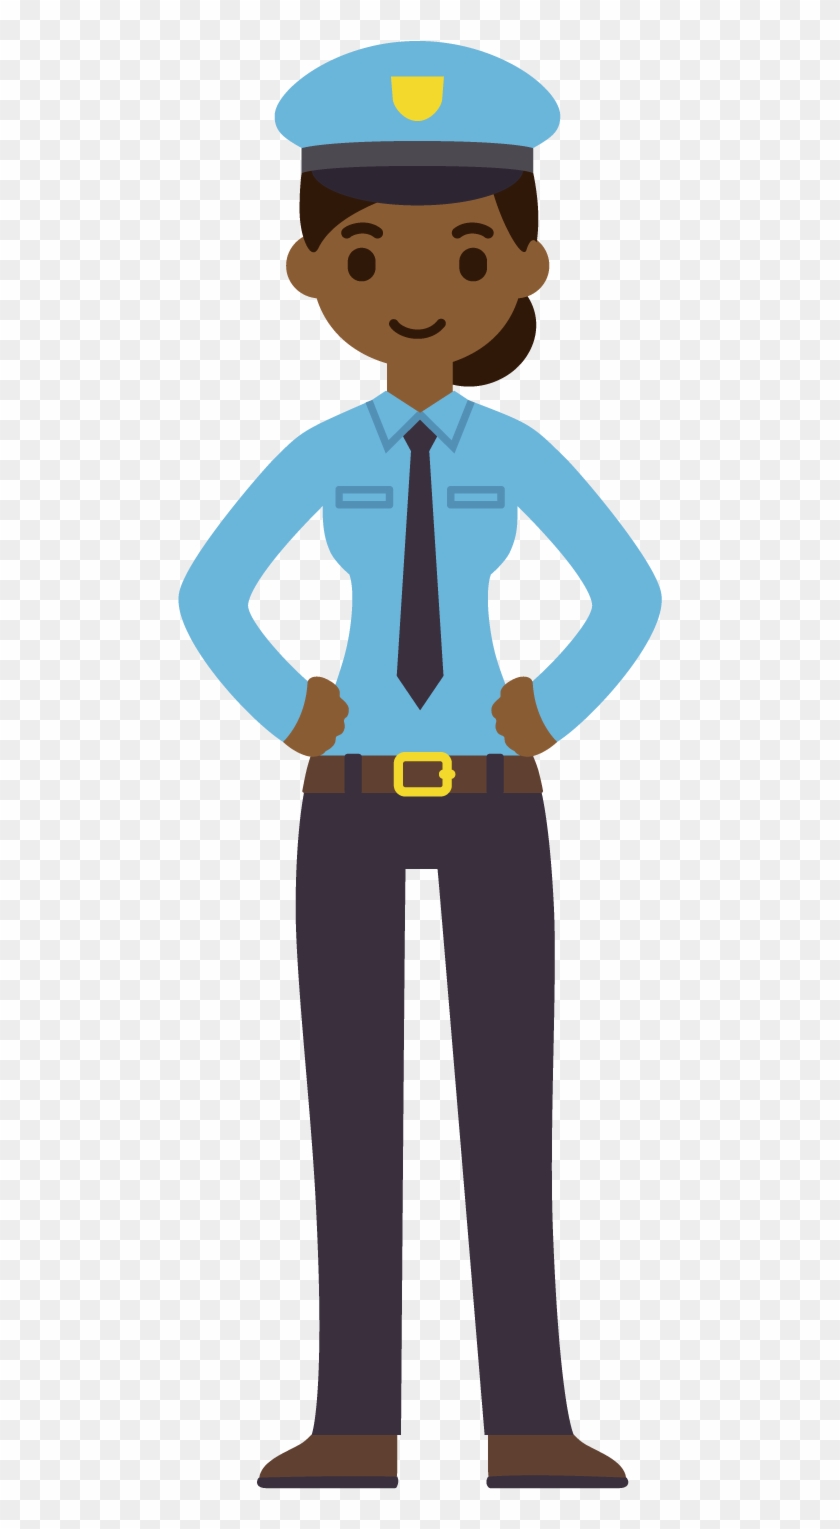 Indian Traffic Policeman Png - Cartoon, Transparent Png -  1500x1500(#778679) - PngFind